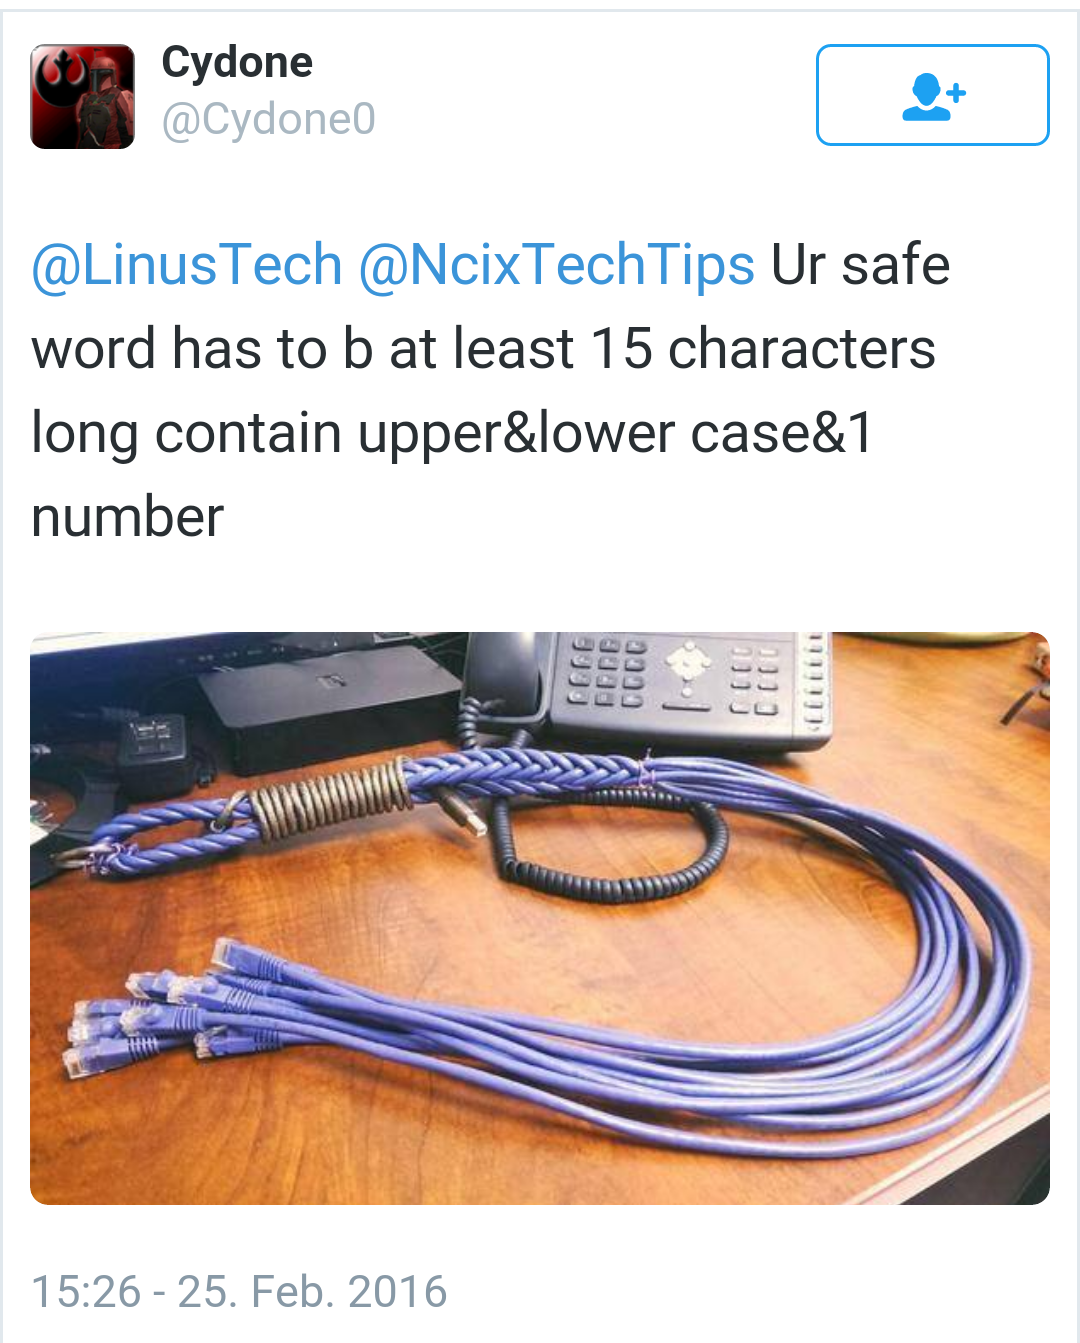 sysadmin whip - Cydone Tech Ur safe word has to b at least 15 characters long contain upper&lower case&1 number Erre Coco 25. Feb. 2016